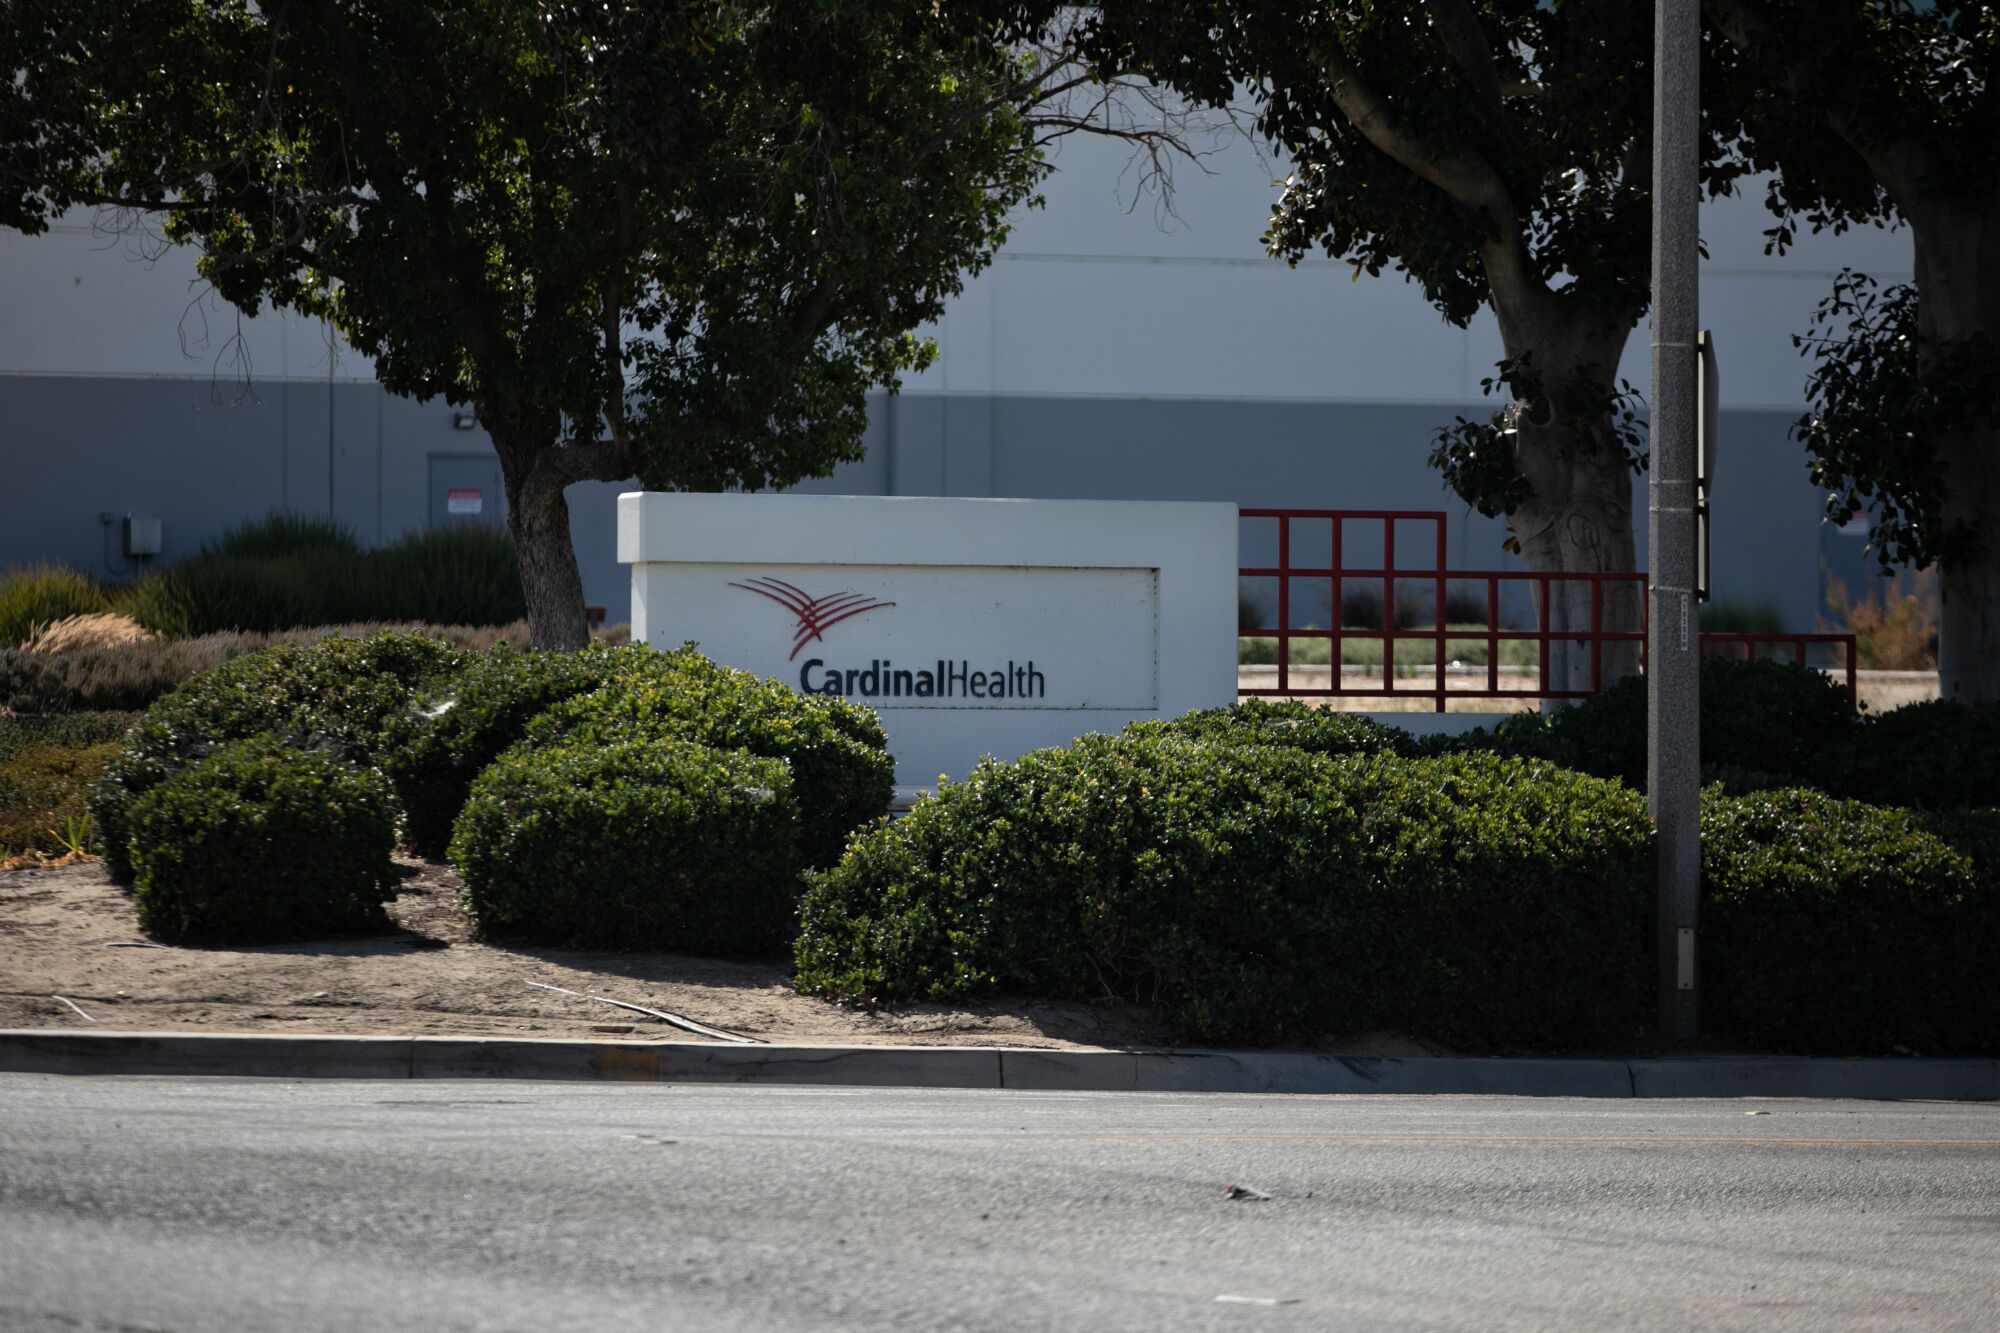  A sign reading Cardinal Health framed by trees